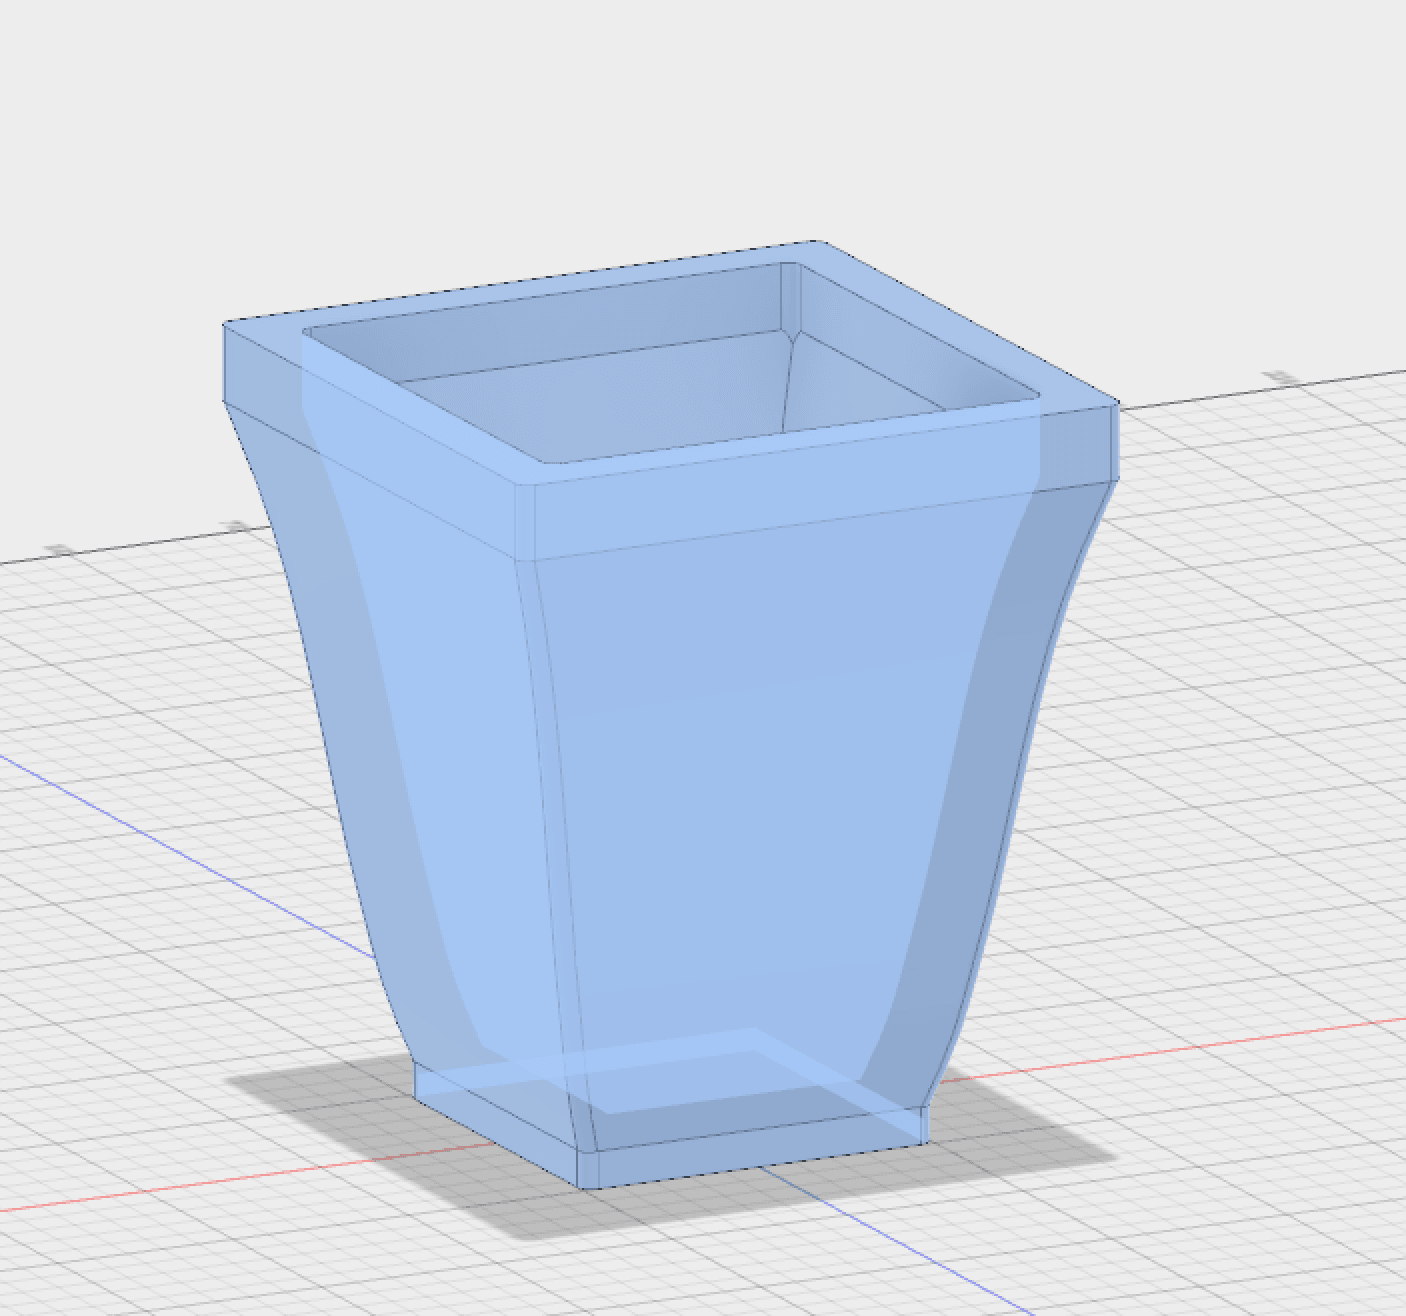 Screen Shot 2018-02-04 at 7.06.56 PM.png Free STL file Planter・Template to download and 3D print, AnthonyVanVolkinburg